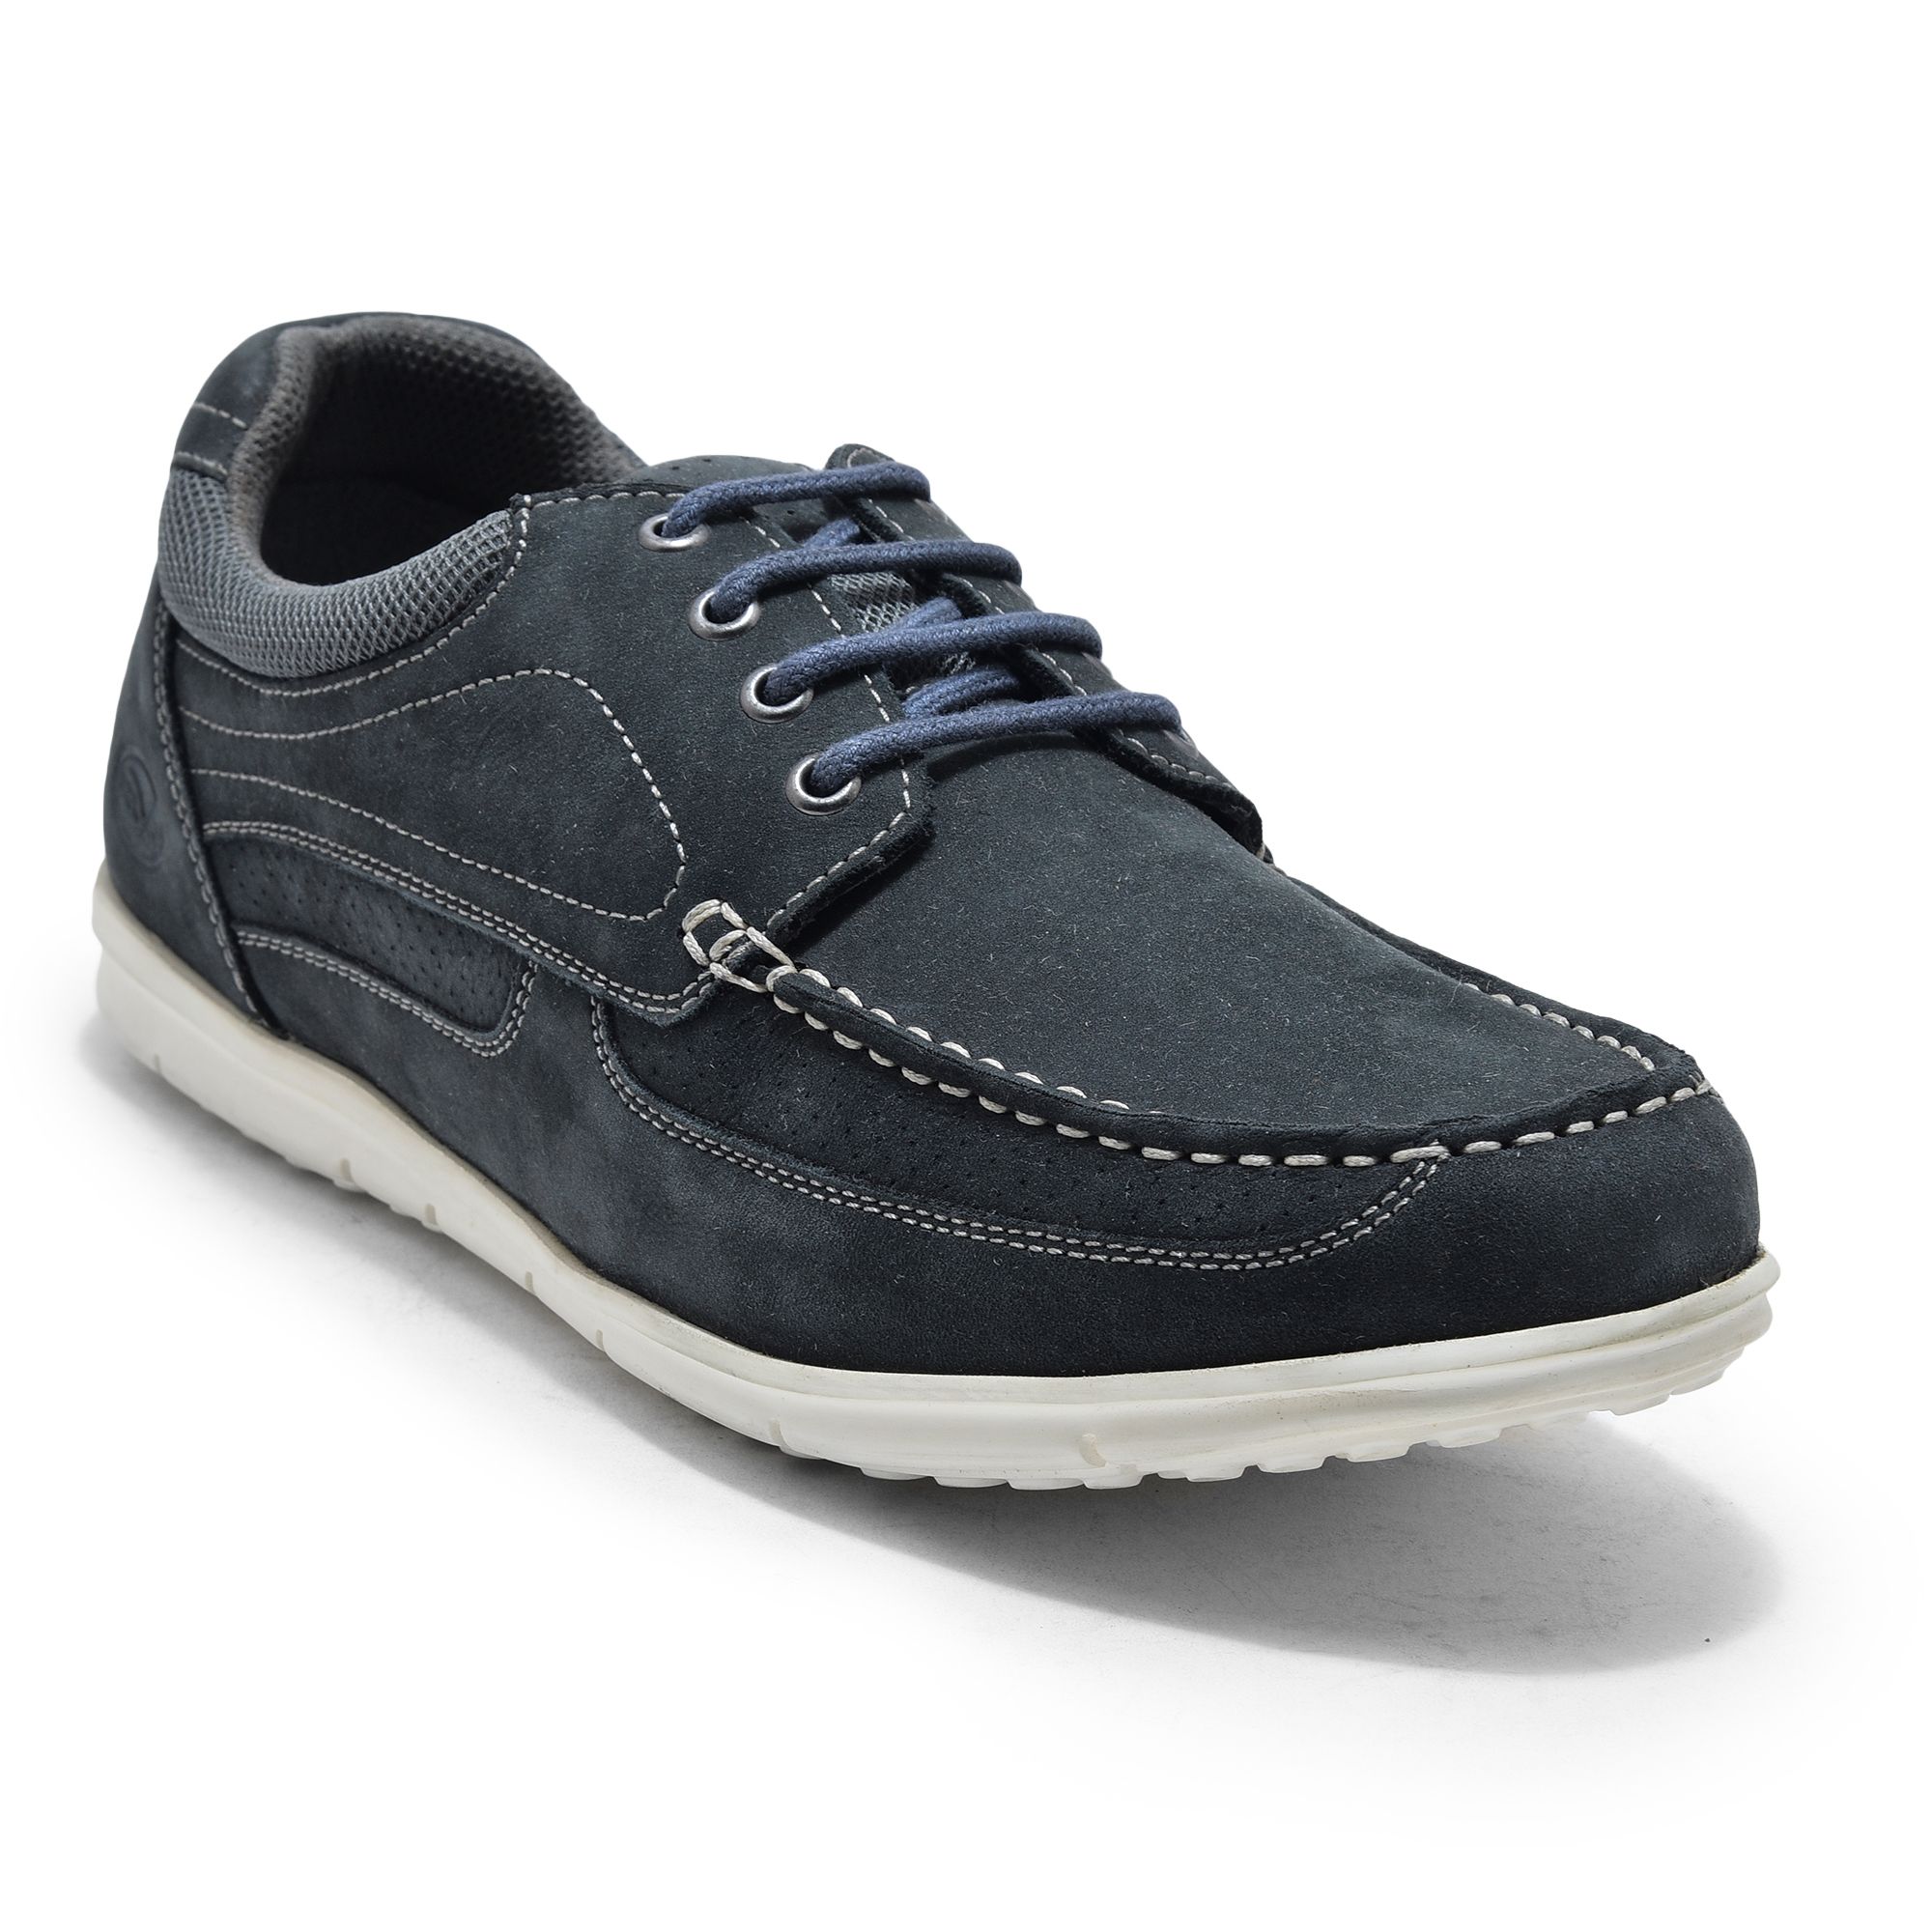 Woodland DNAVY casual shoes